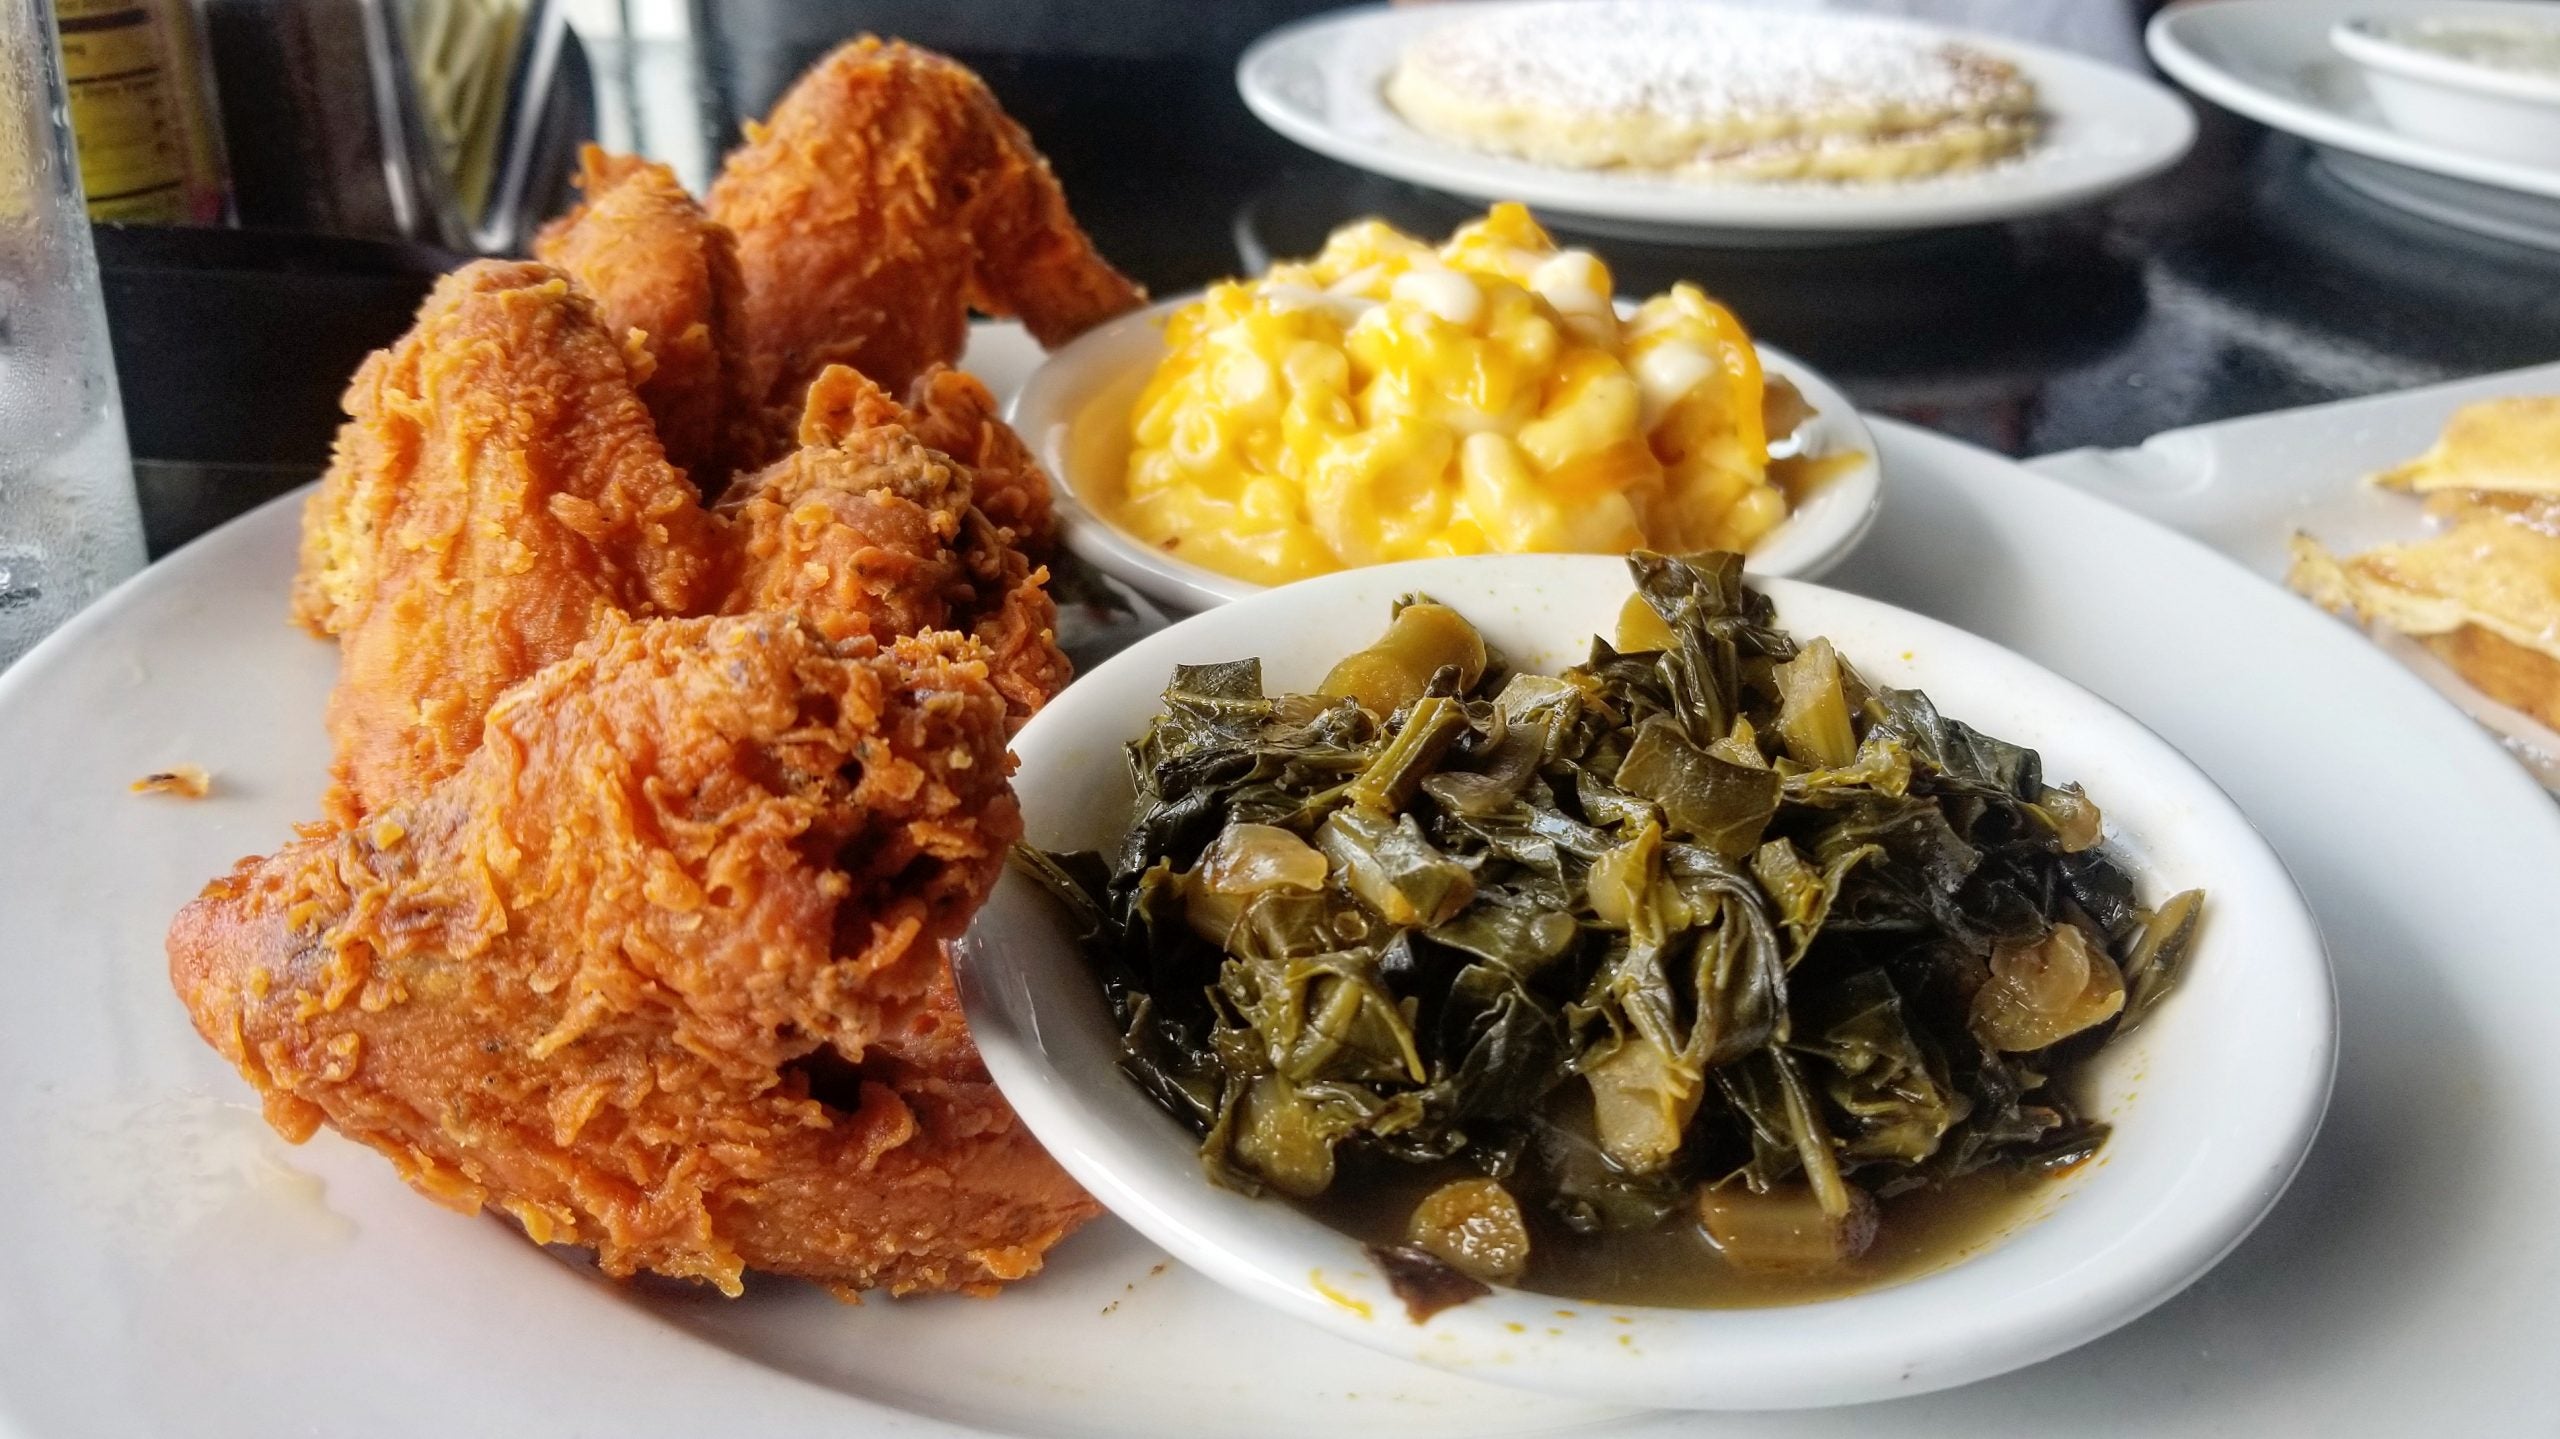 Black Restaurant Week Comes Through To Keep The Black Food Scene Thriving